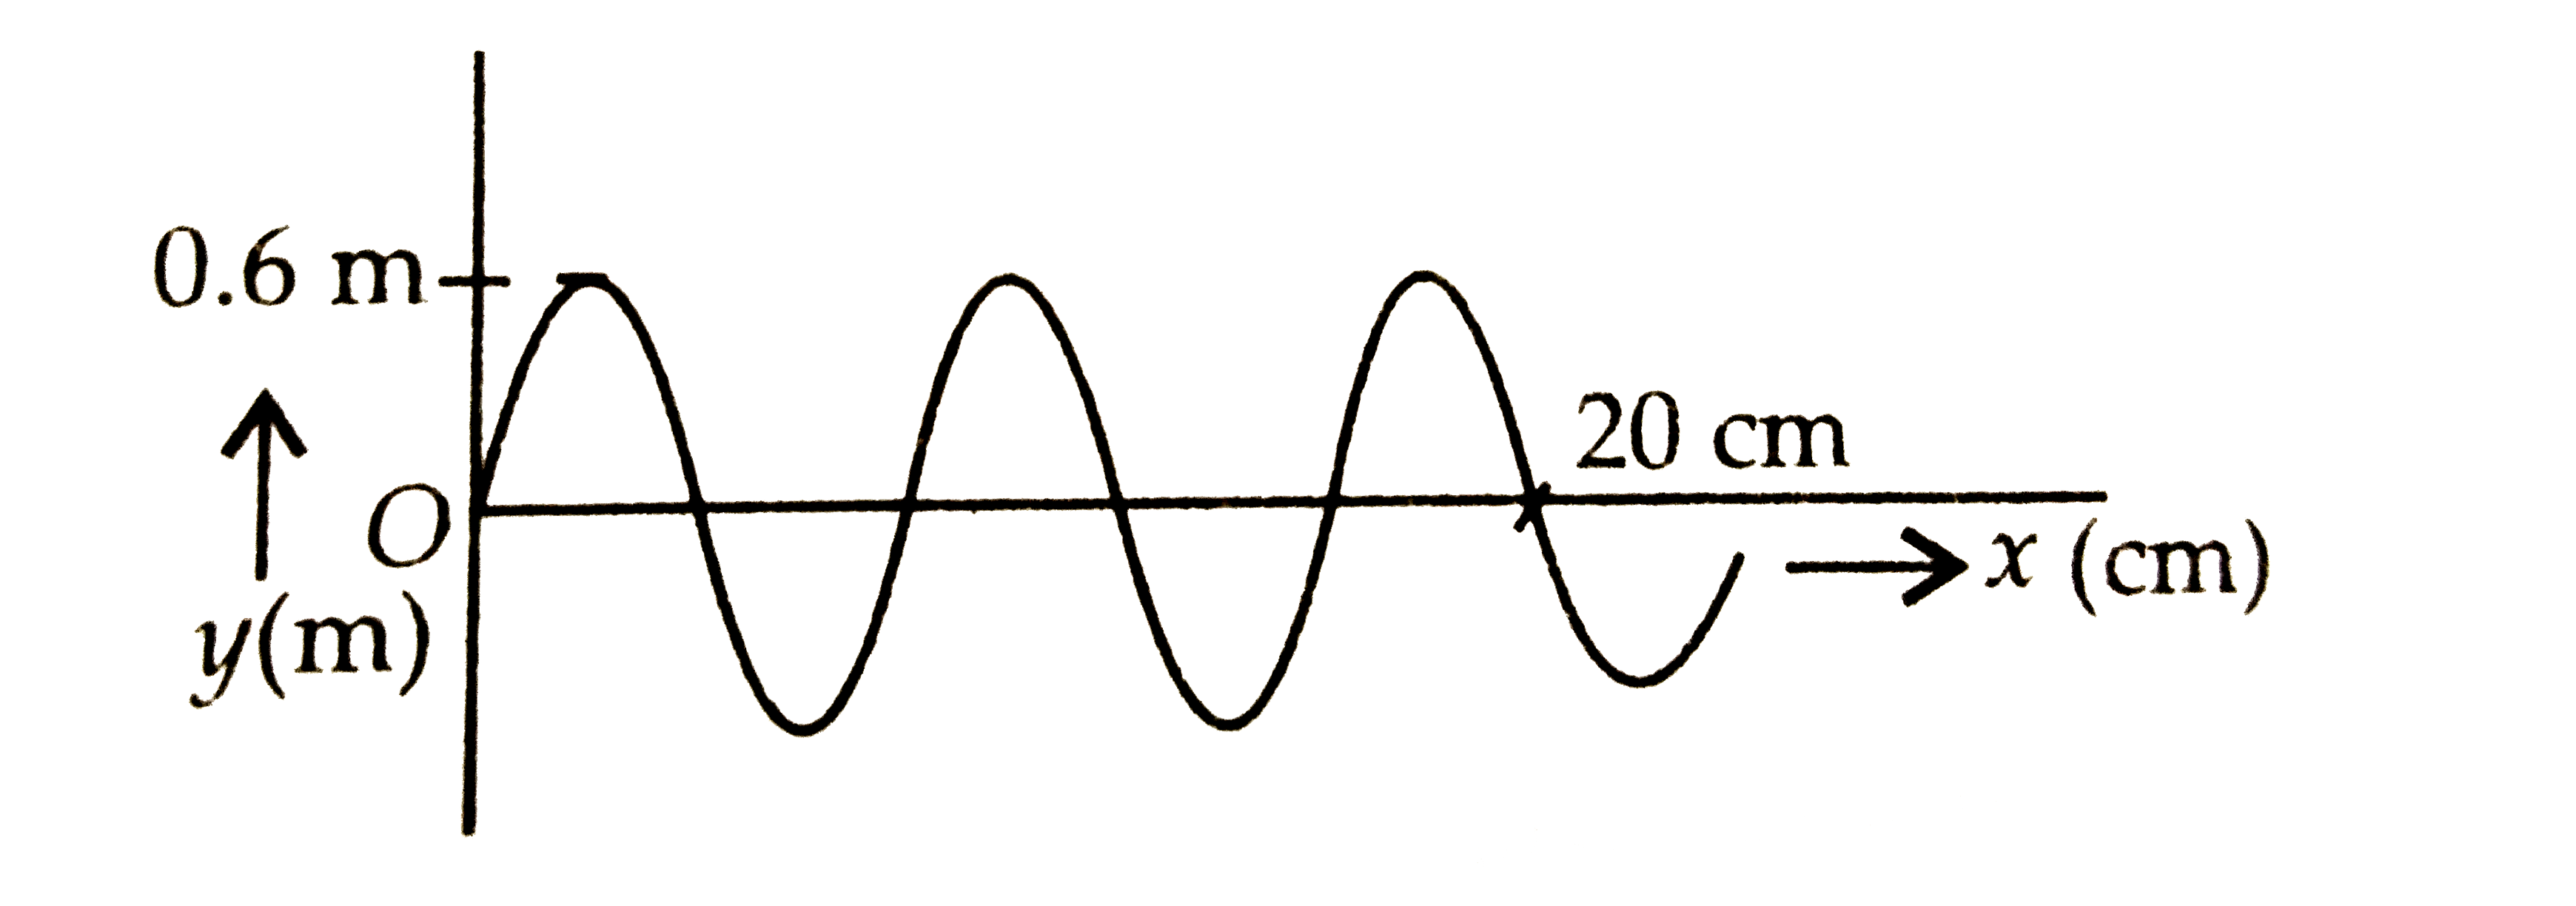 What is the wavelength of wave shown in given figure ?